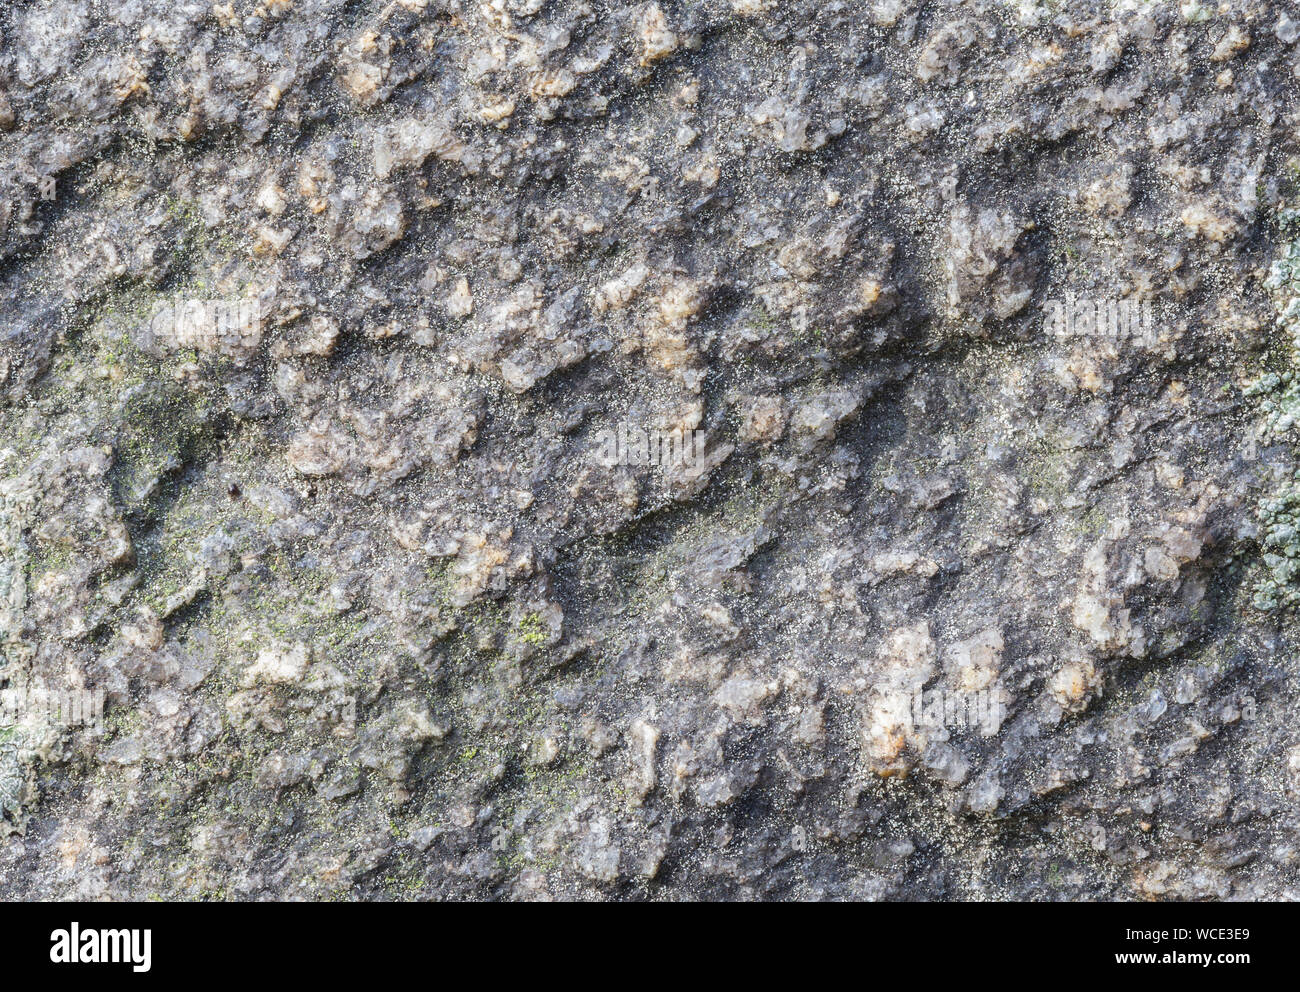 Macro close-up of a rough rock surface with fine grains of sand. High resolution full frame textured background. Stock Photo